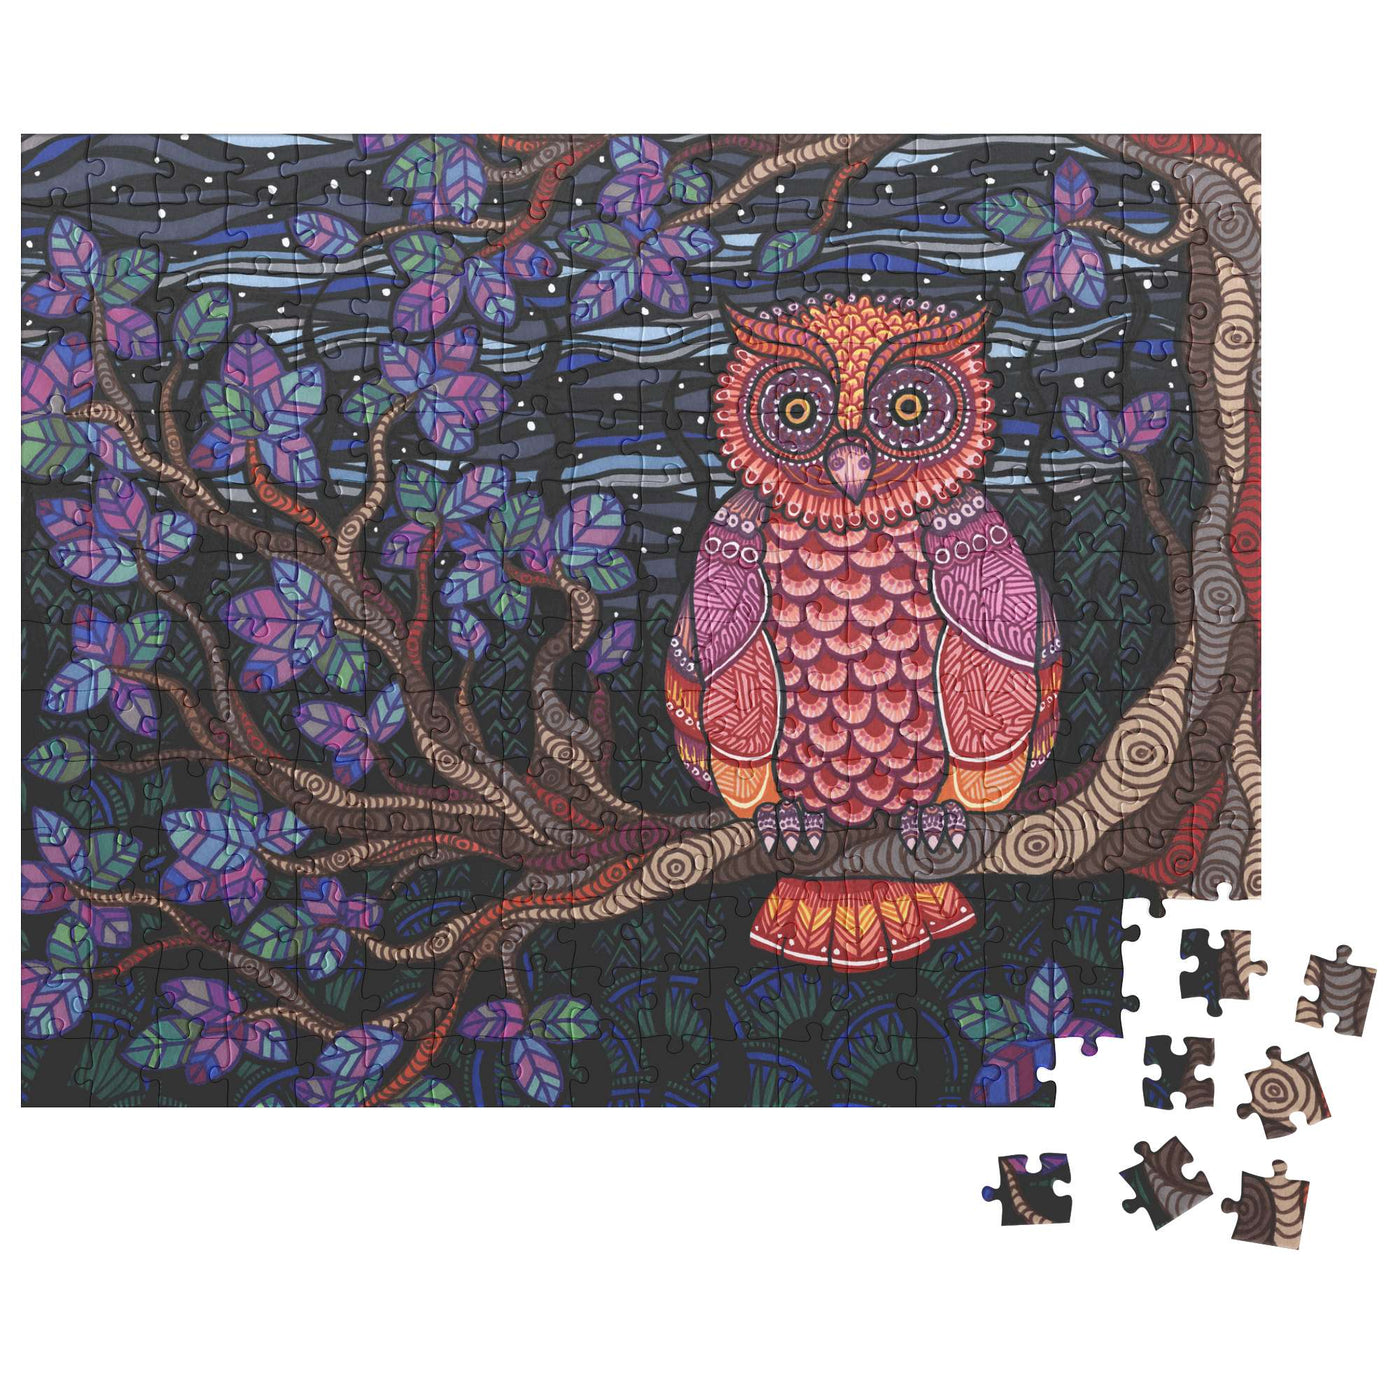 Colorful illustrated Owl Tree Puzzle with an owl perched on a branch at night, with intricate patterns and pieces partially assembled at the bottom right.